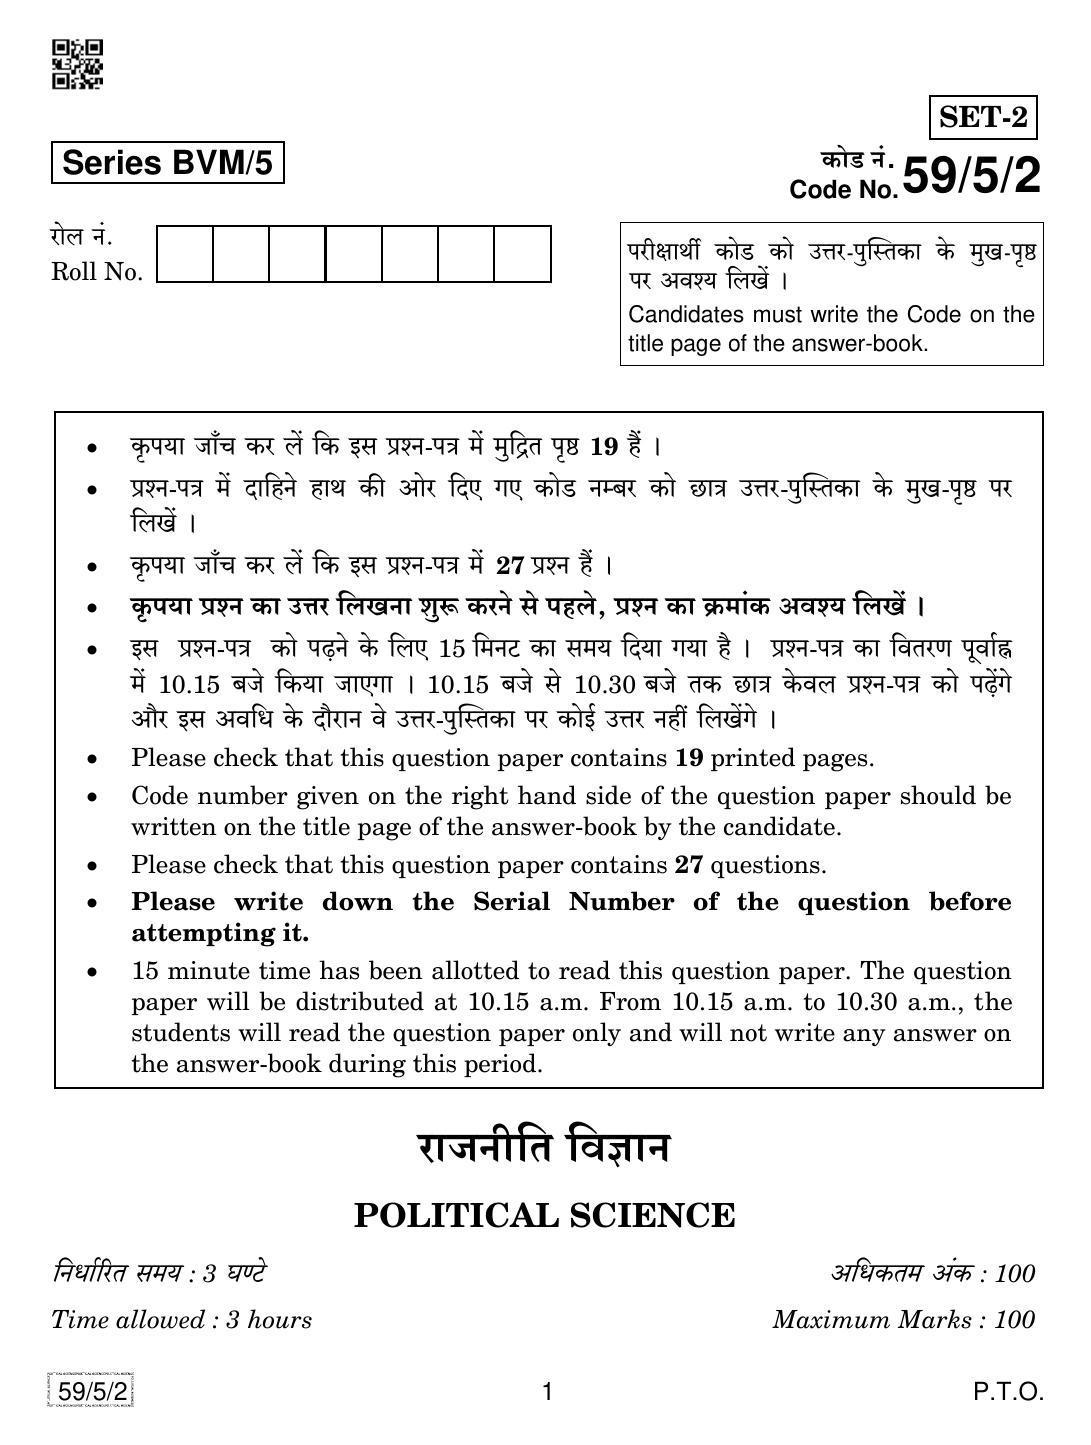 CBSE Class 12 59-5-2 Political Science 2019 Question Paper - Page 1